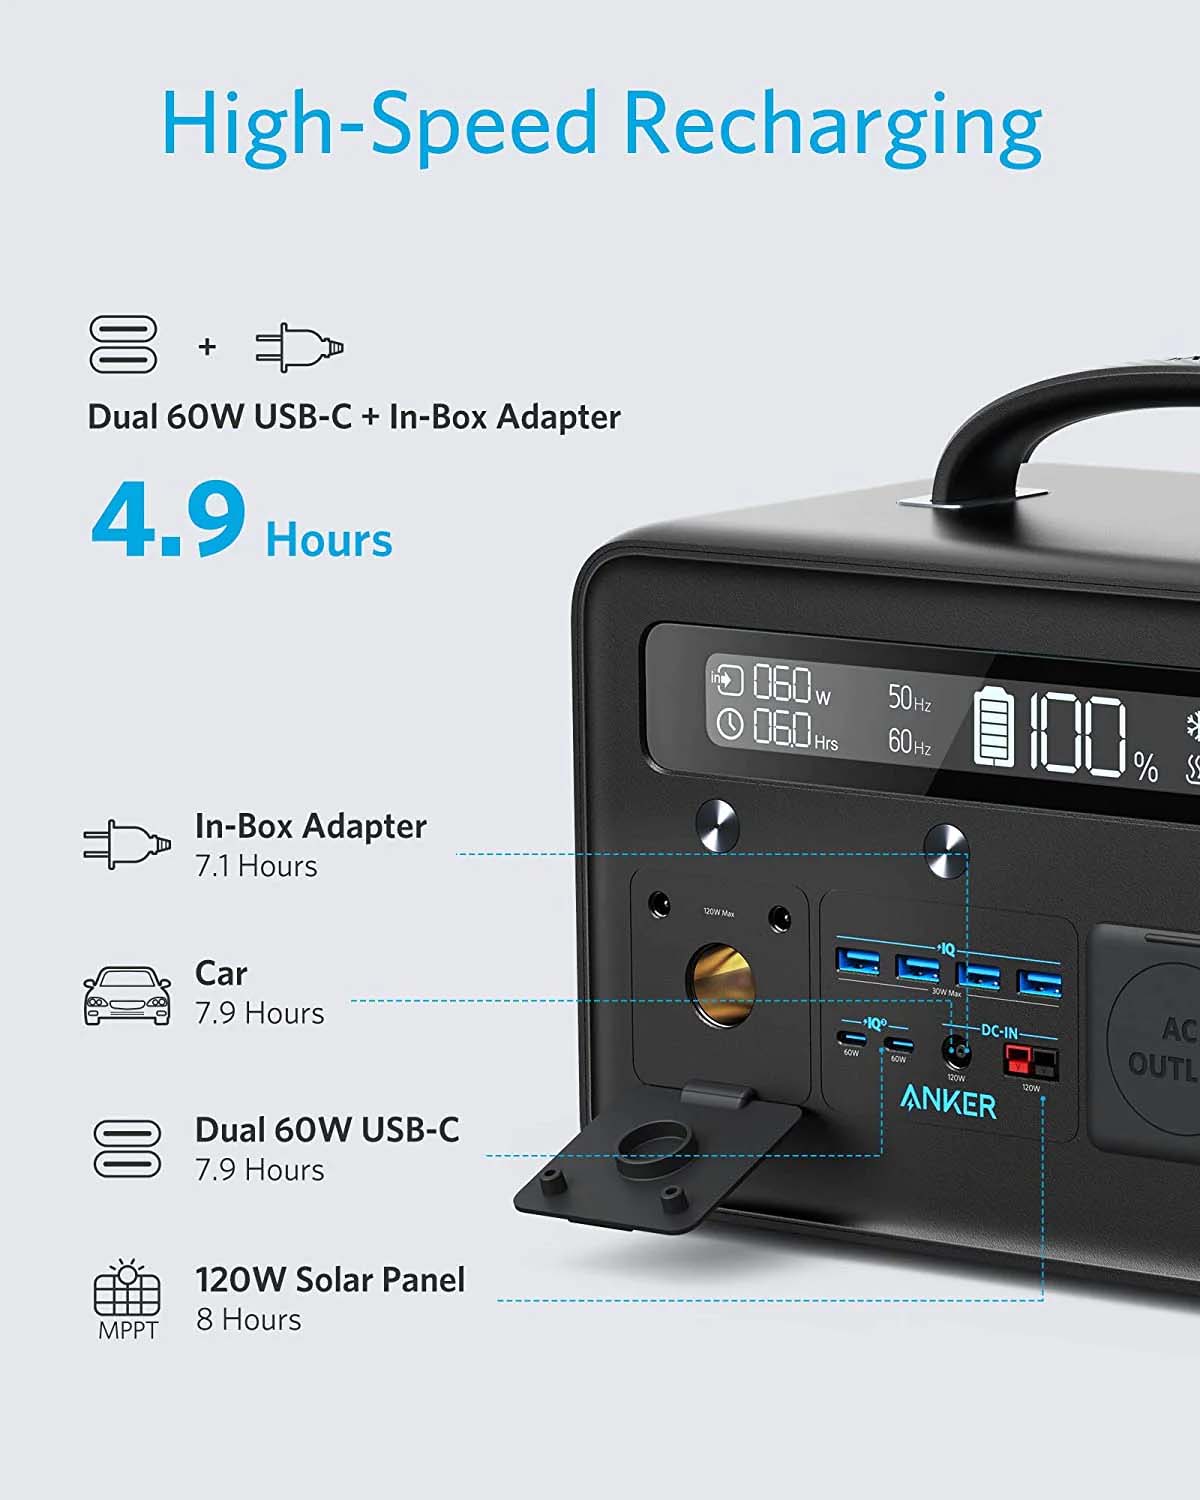 The Anker PowerHouse 545 Portable Power Station Can Recharge In 4.9 Hours